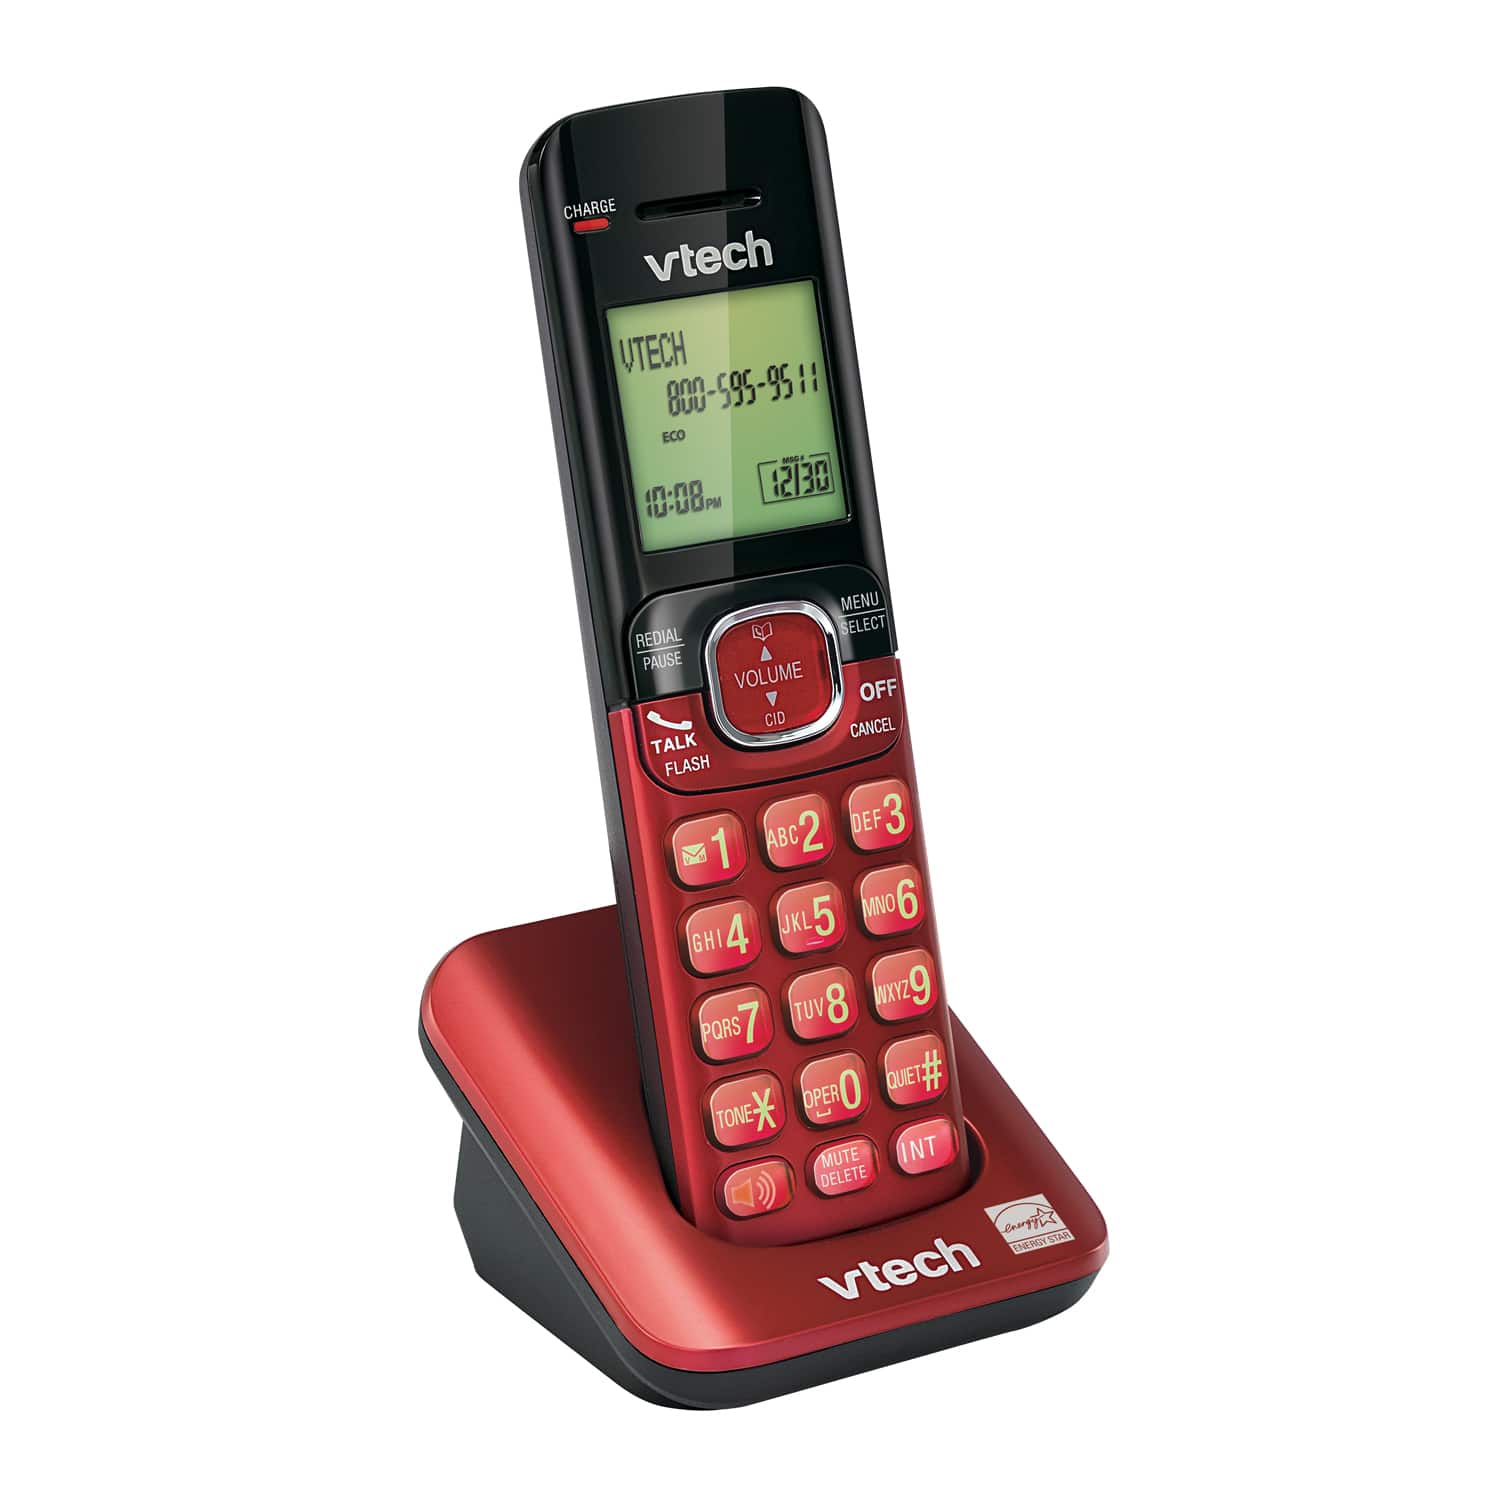 Accessory Handset With Caller ID/Call Waiting | CS6509-16 ...